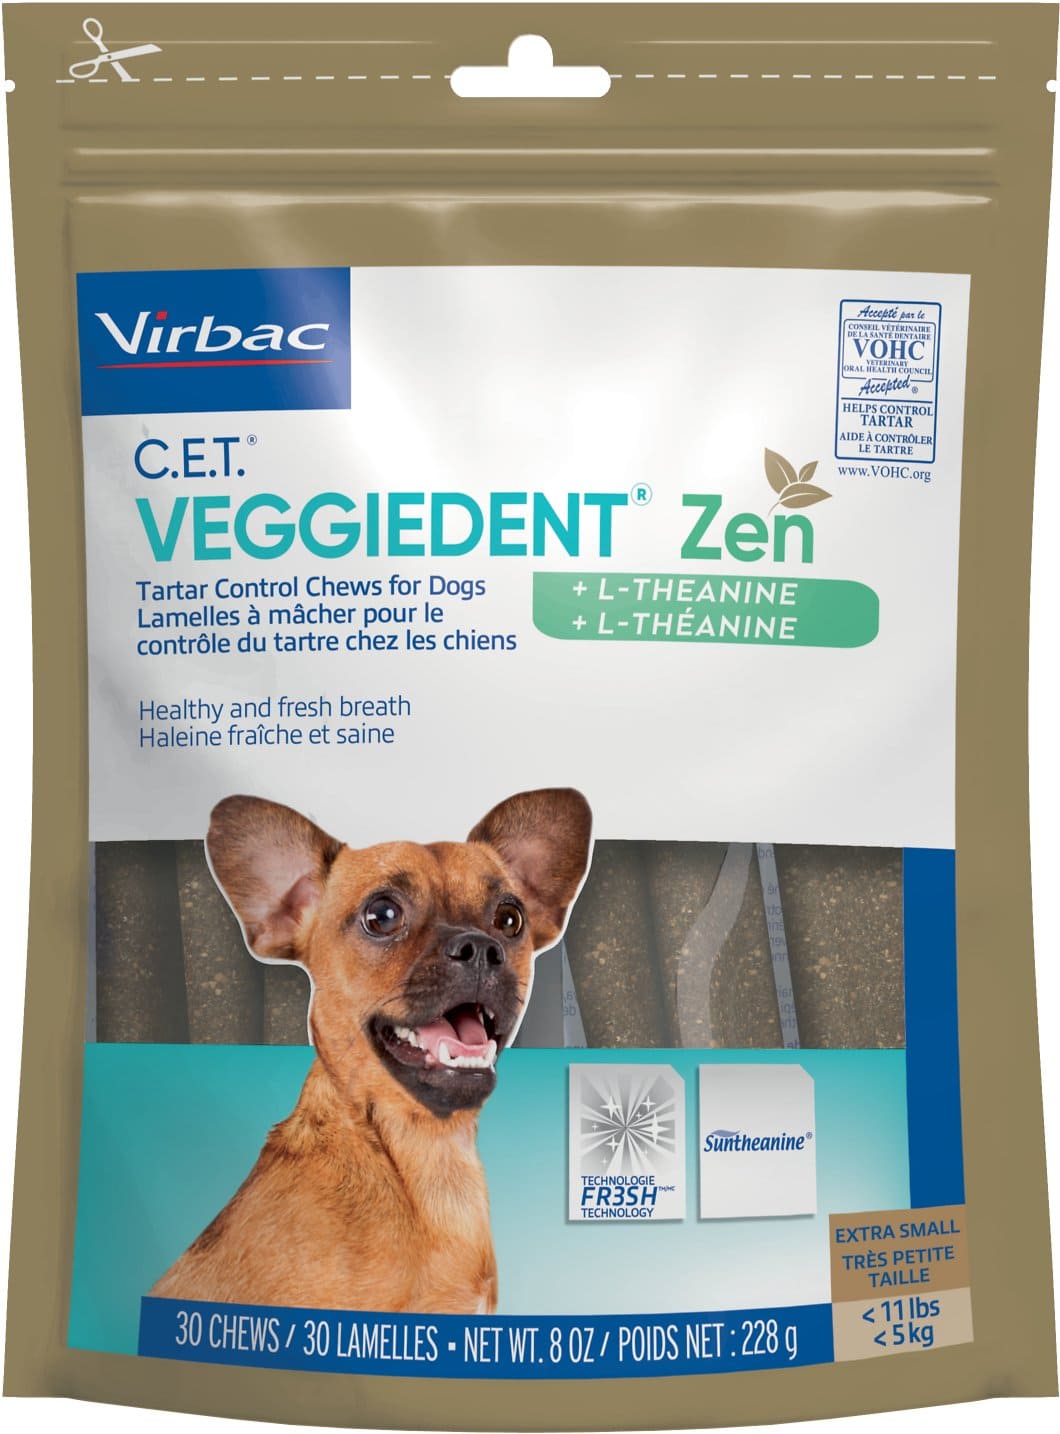 C.E.T. VeggieDent Zen + L-Theanine for extra small dogs up to 11 lbs 30 chews 1